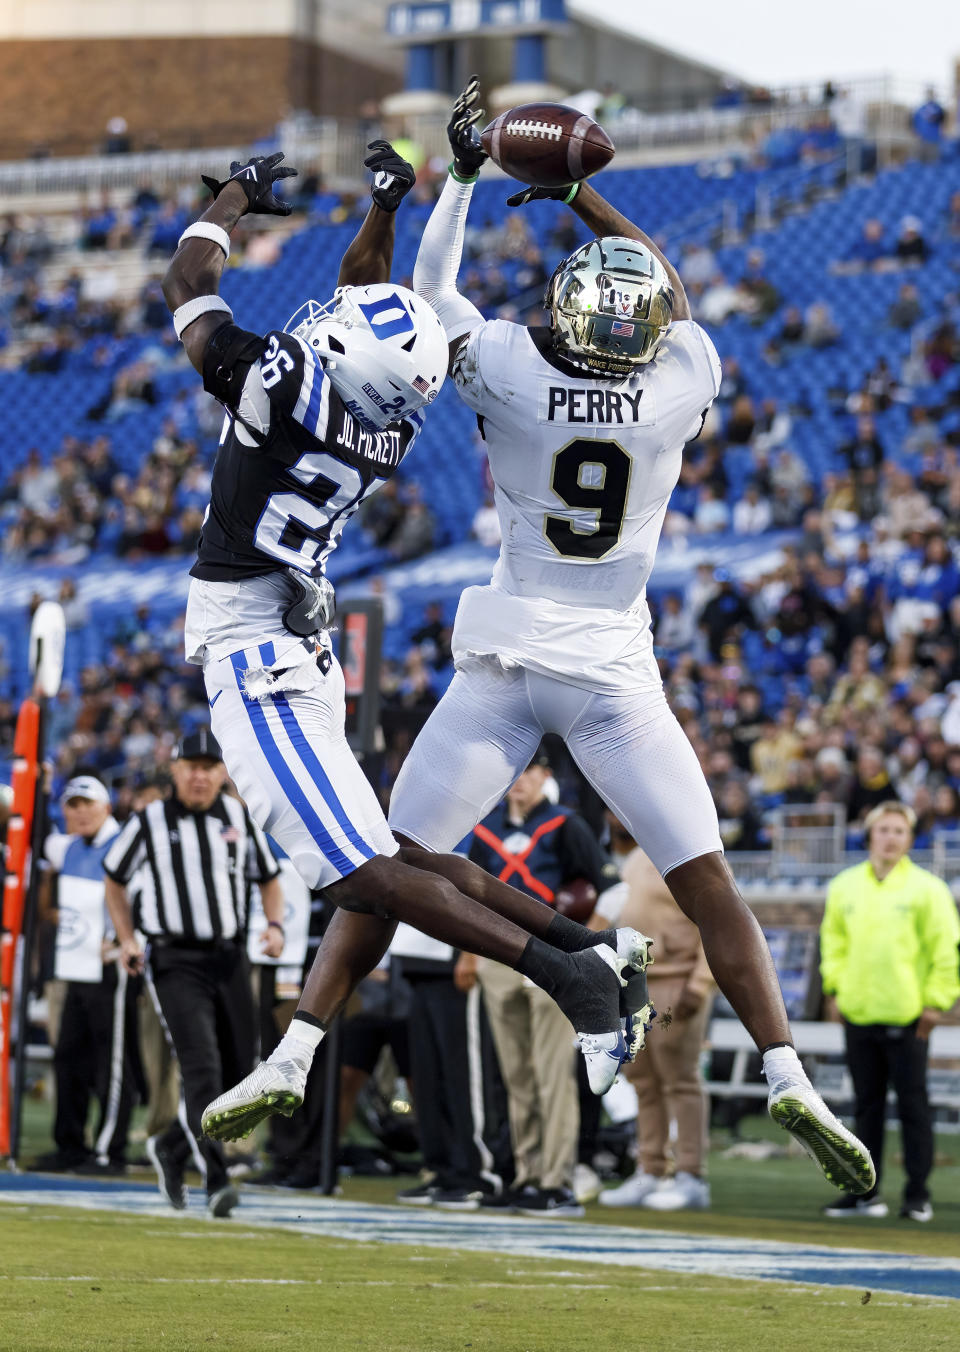 A pass intended for Wake Forest's A.T. Perry (9) flies incomplete as Duke's Joshua Pickett defends during the first half of an NCAA college football game in Durham, N.C., Saturday, Nov. 26, 2022. (AP Photo/Ben McKeown)